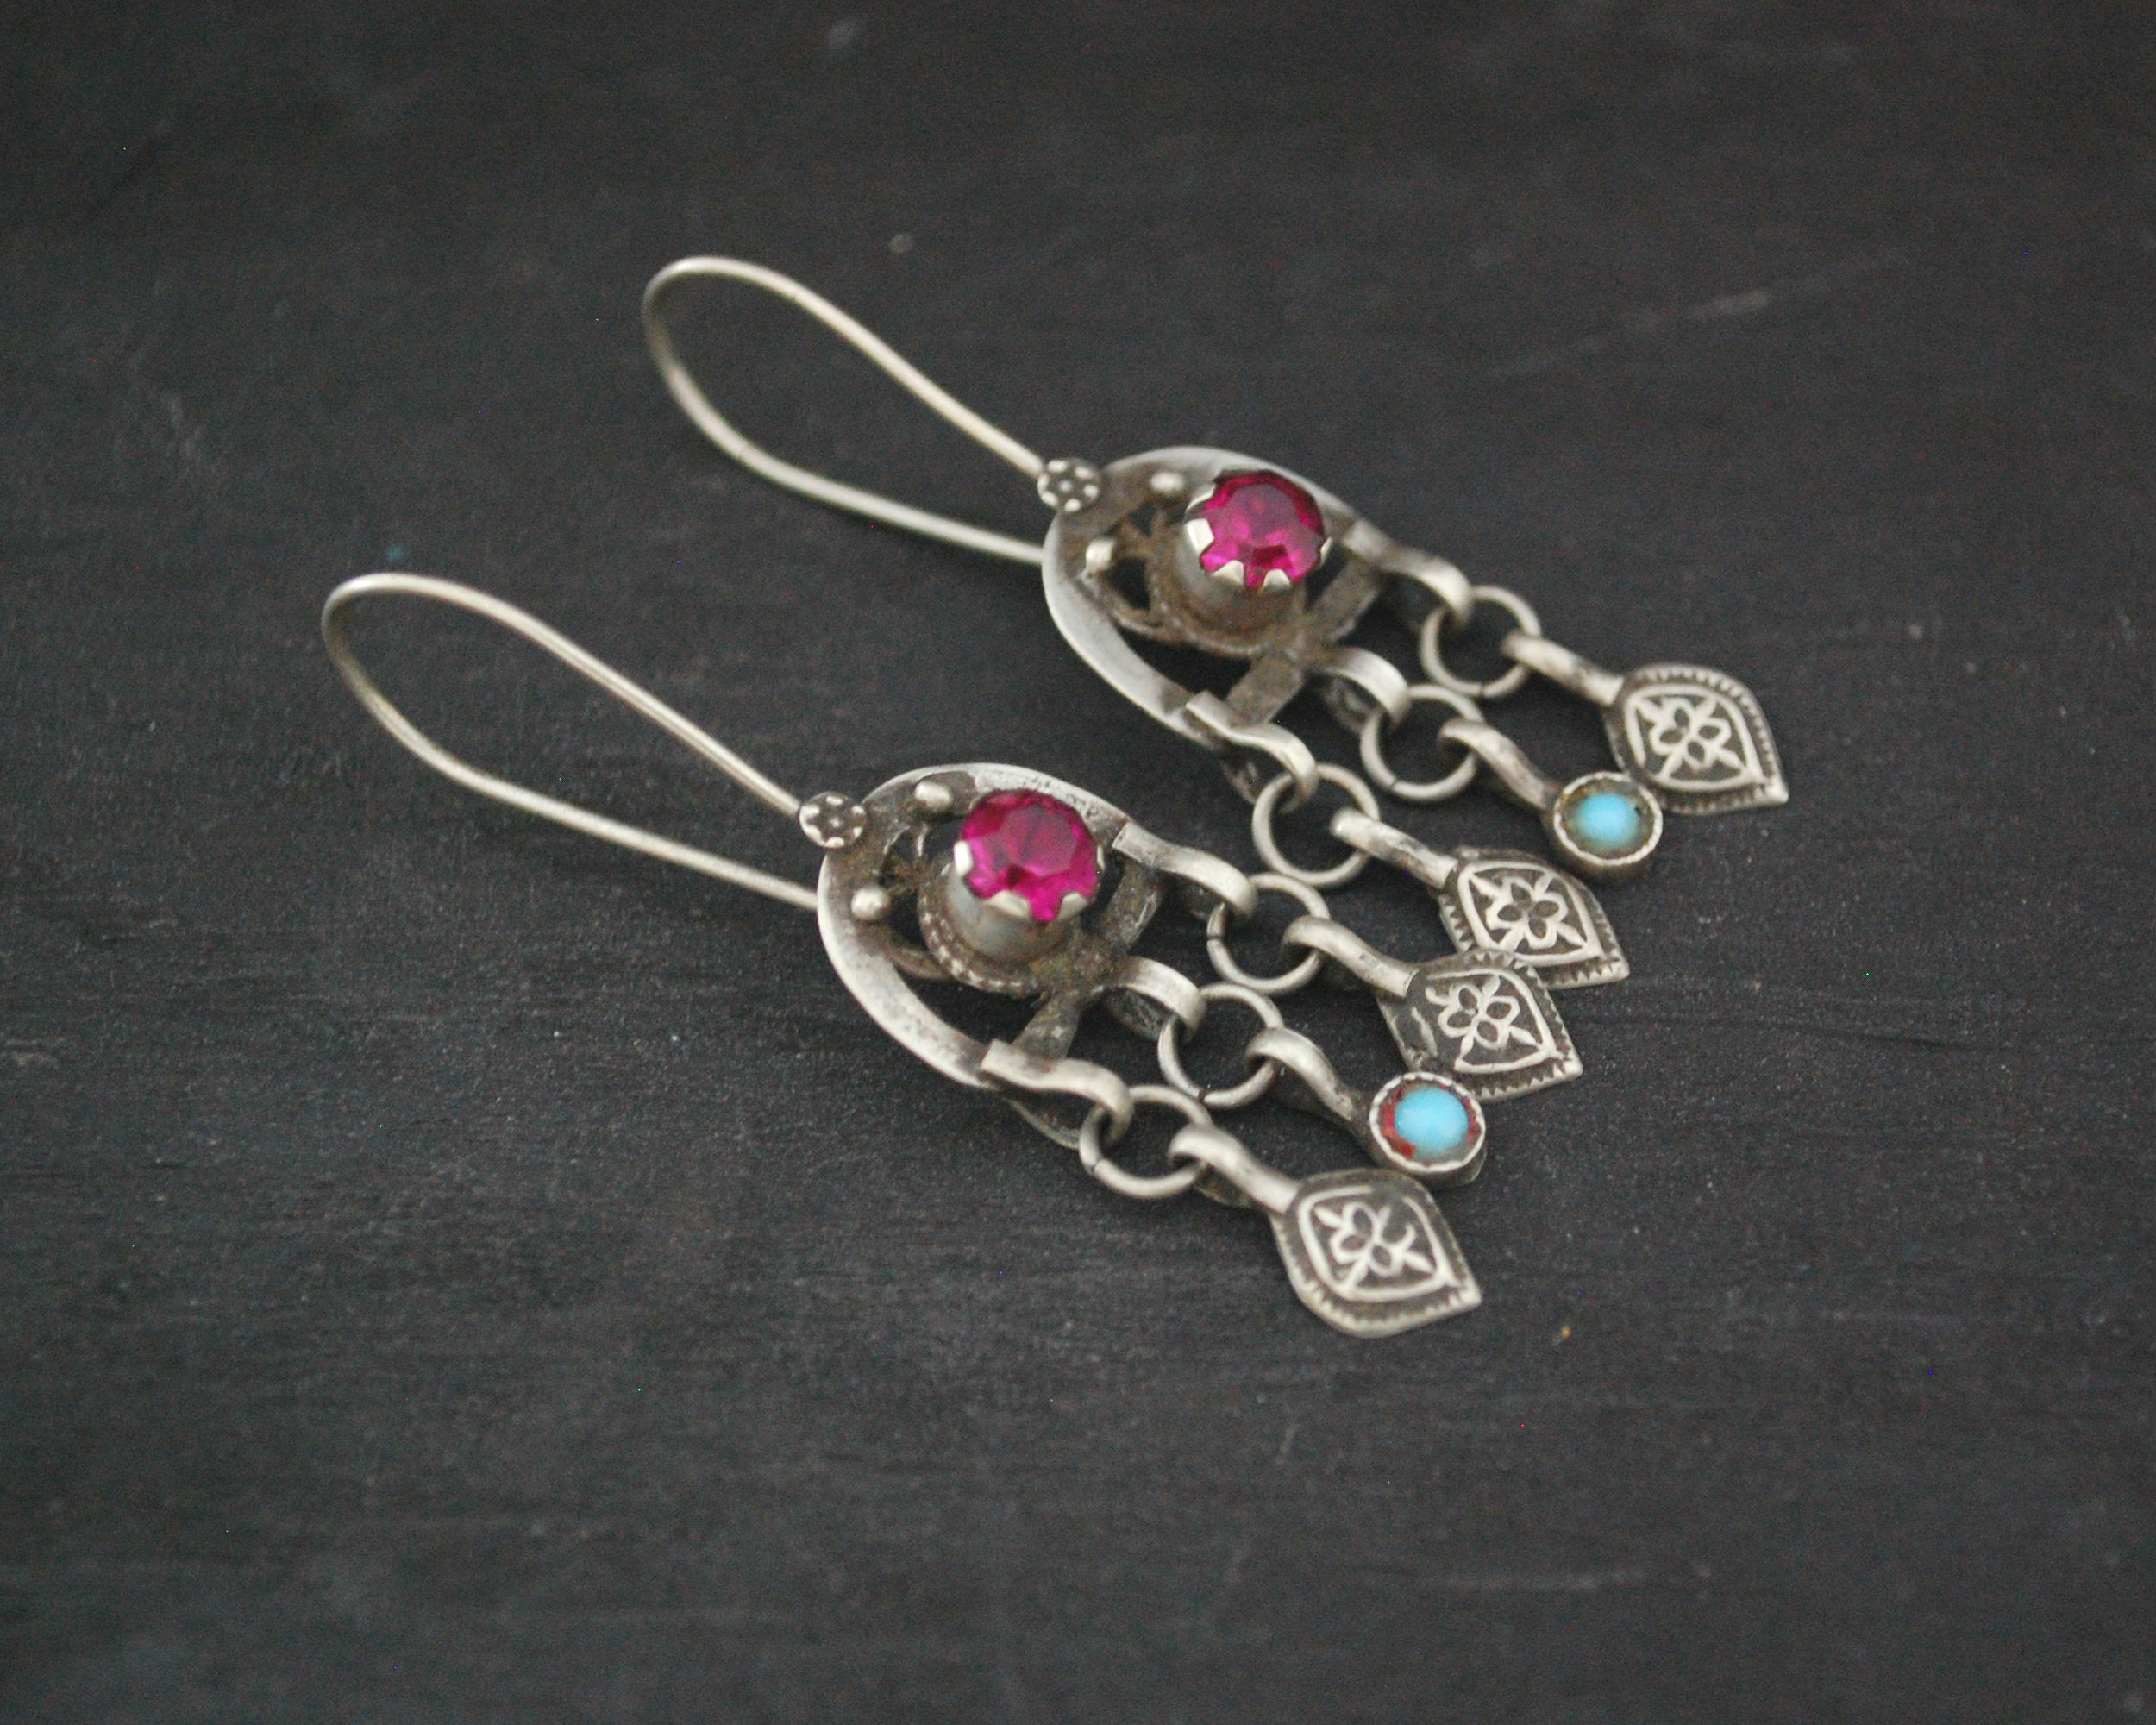 Afghani Earrings with Turquoise and Pink Glass